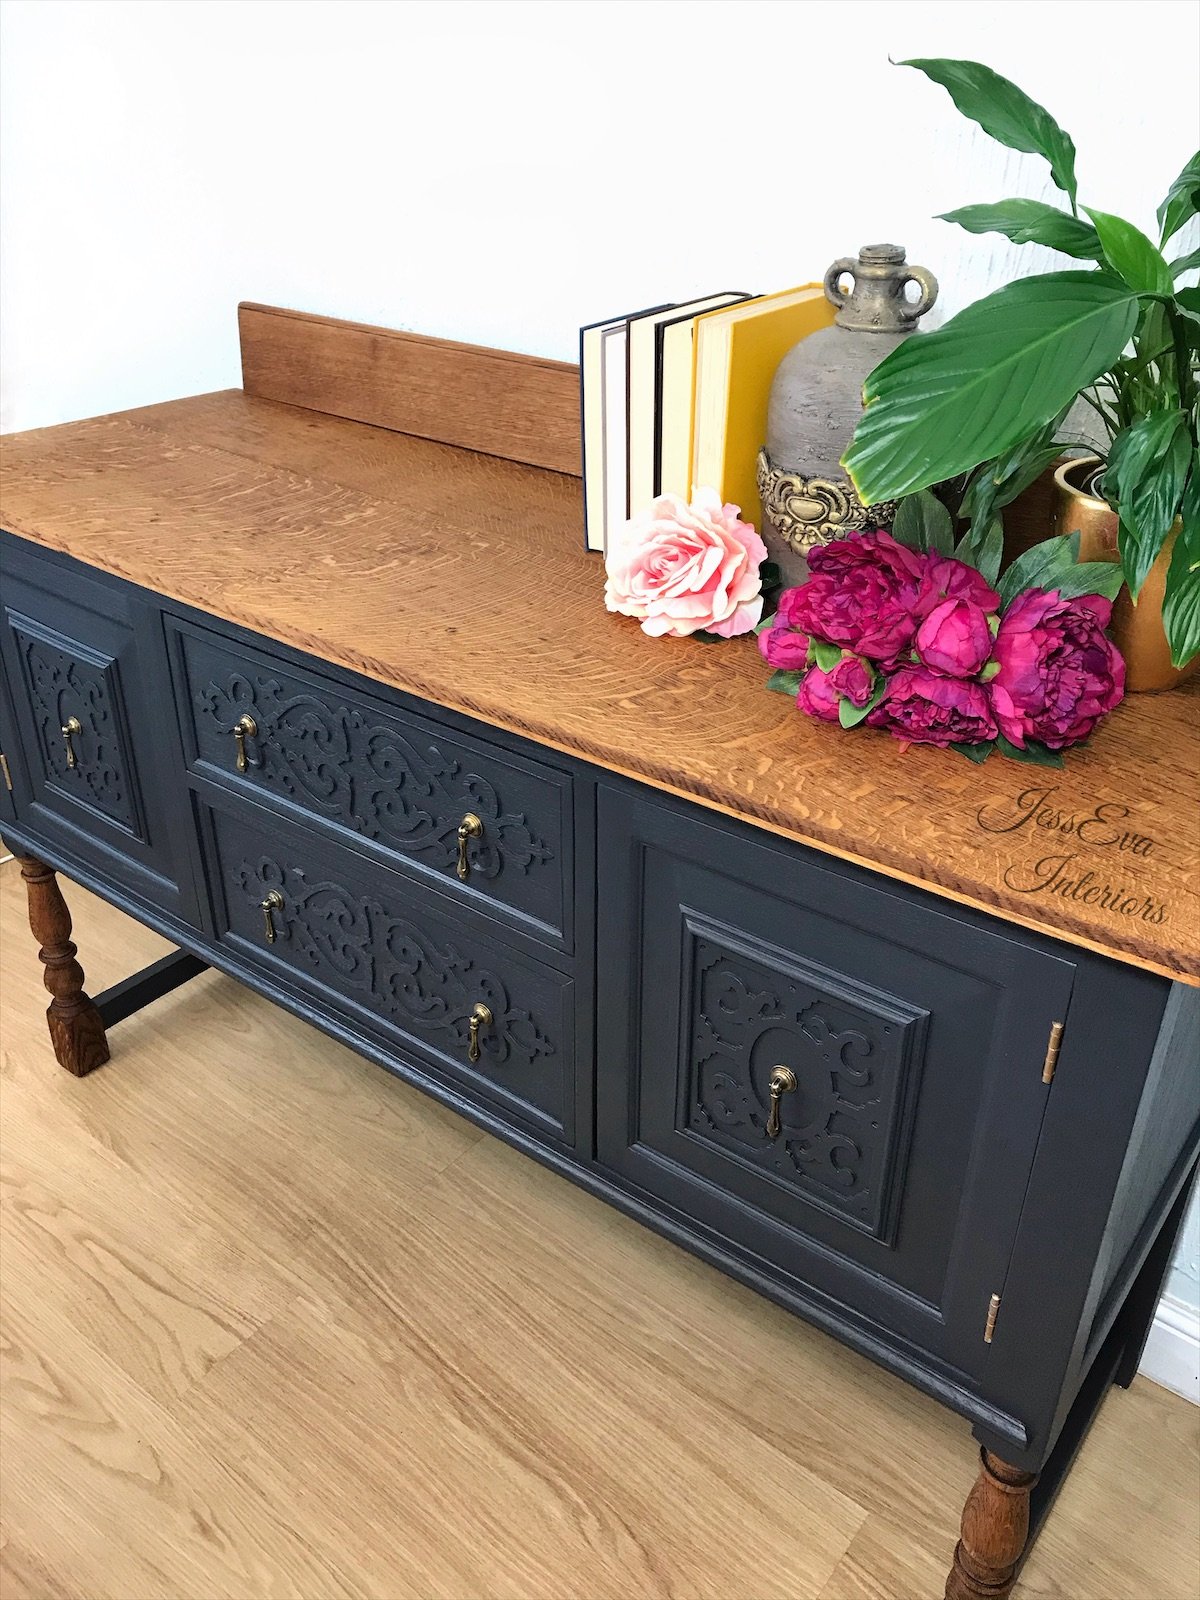 Antique Vintage Solid Oak SIDEBOARD BUFFET TV UNIT CABINET WITH DRAWERS Painted in Charcoal Grey 